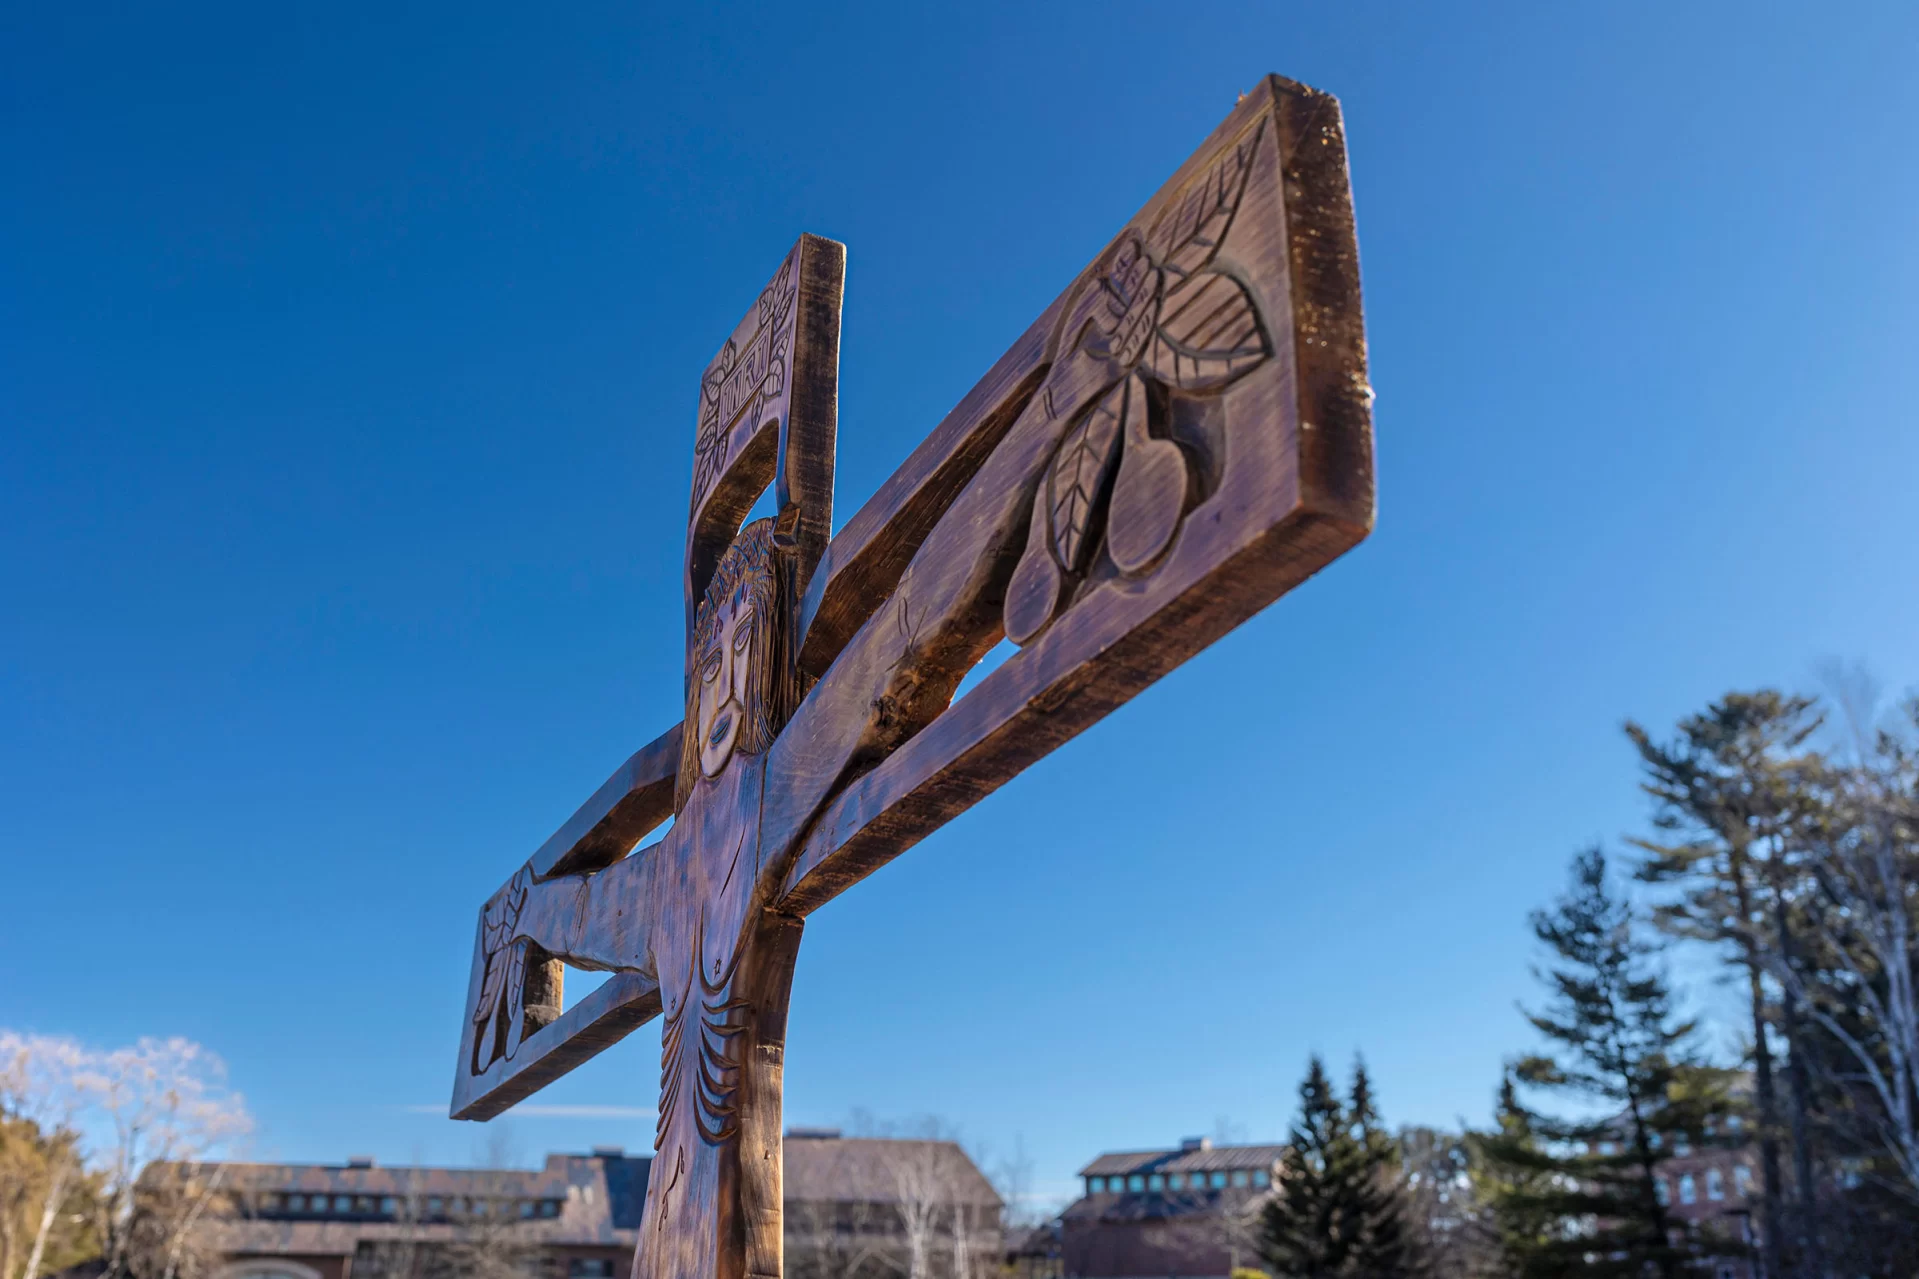 What: Wood sculpture of Christ on the cross
Created by: The Brazilian sculptor Ziltamir Sebastião Soares de Maria (1947–2013) (aka "Manxa") was in residence at Bates in spring 1971 under a program called "Maine's Partners of the Alliance," a culture exchange program then part of USAID and now a private entity called "Partners of the Americas."
Name: The back of the sculpture, which is, has what appears to be its Portuguese title, Auto Retrato Do Meu Povo, (“OWtoh hrayTRAtoh doh MEI-oh POvoh”, roll the “r”s in retrato) or "Self Portrait of My People"
Size: 7 feet tall and 5 feet 8 inches wide
When Created: The back has written March 5, 1971, with a dollar figure (a price estimate for a potential sale?) also written ($800).
Inscription at Top: “INRI,” Latin for “Jesus, King of the Jews,” commonly seen on crucifixes.
Fruit: The fruit that Jesus grasps could reflect Manxa’s style of indiginous Brazilian art. He “carved in wood... sometimes with spaces in copper inlays, characters, crafts and all tropical flora of Rio Grande do Norte,” his home state in Brazil.